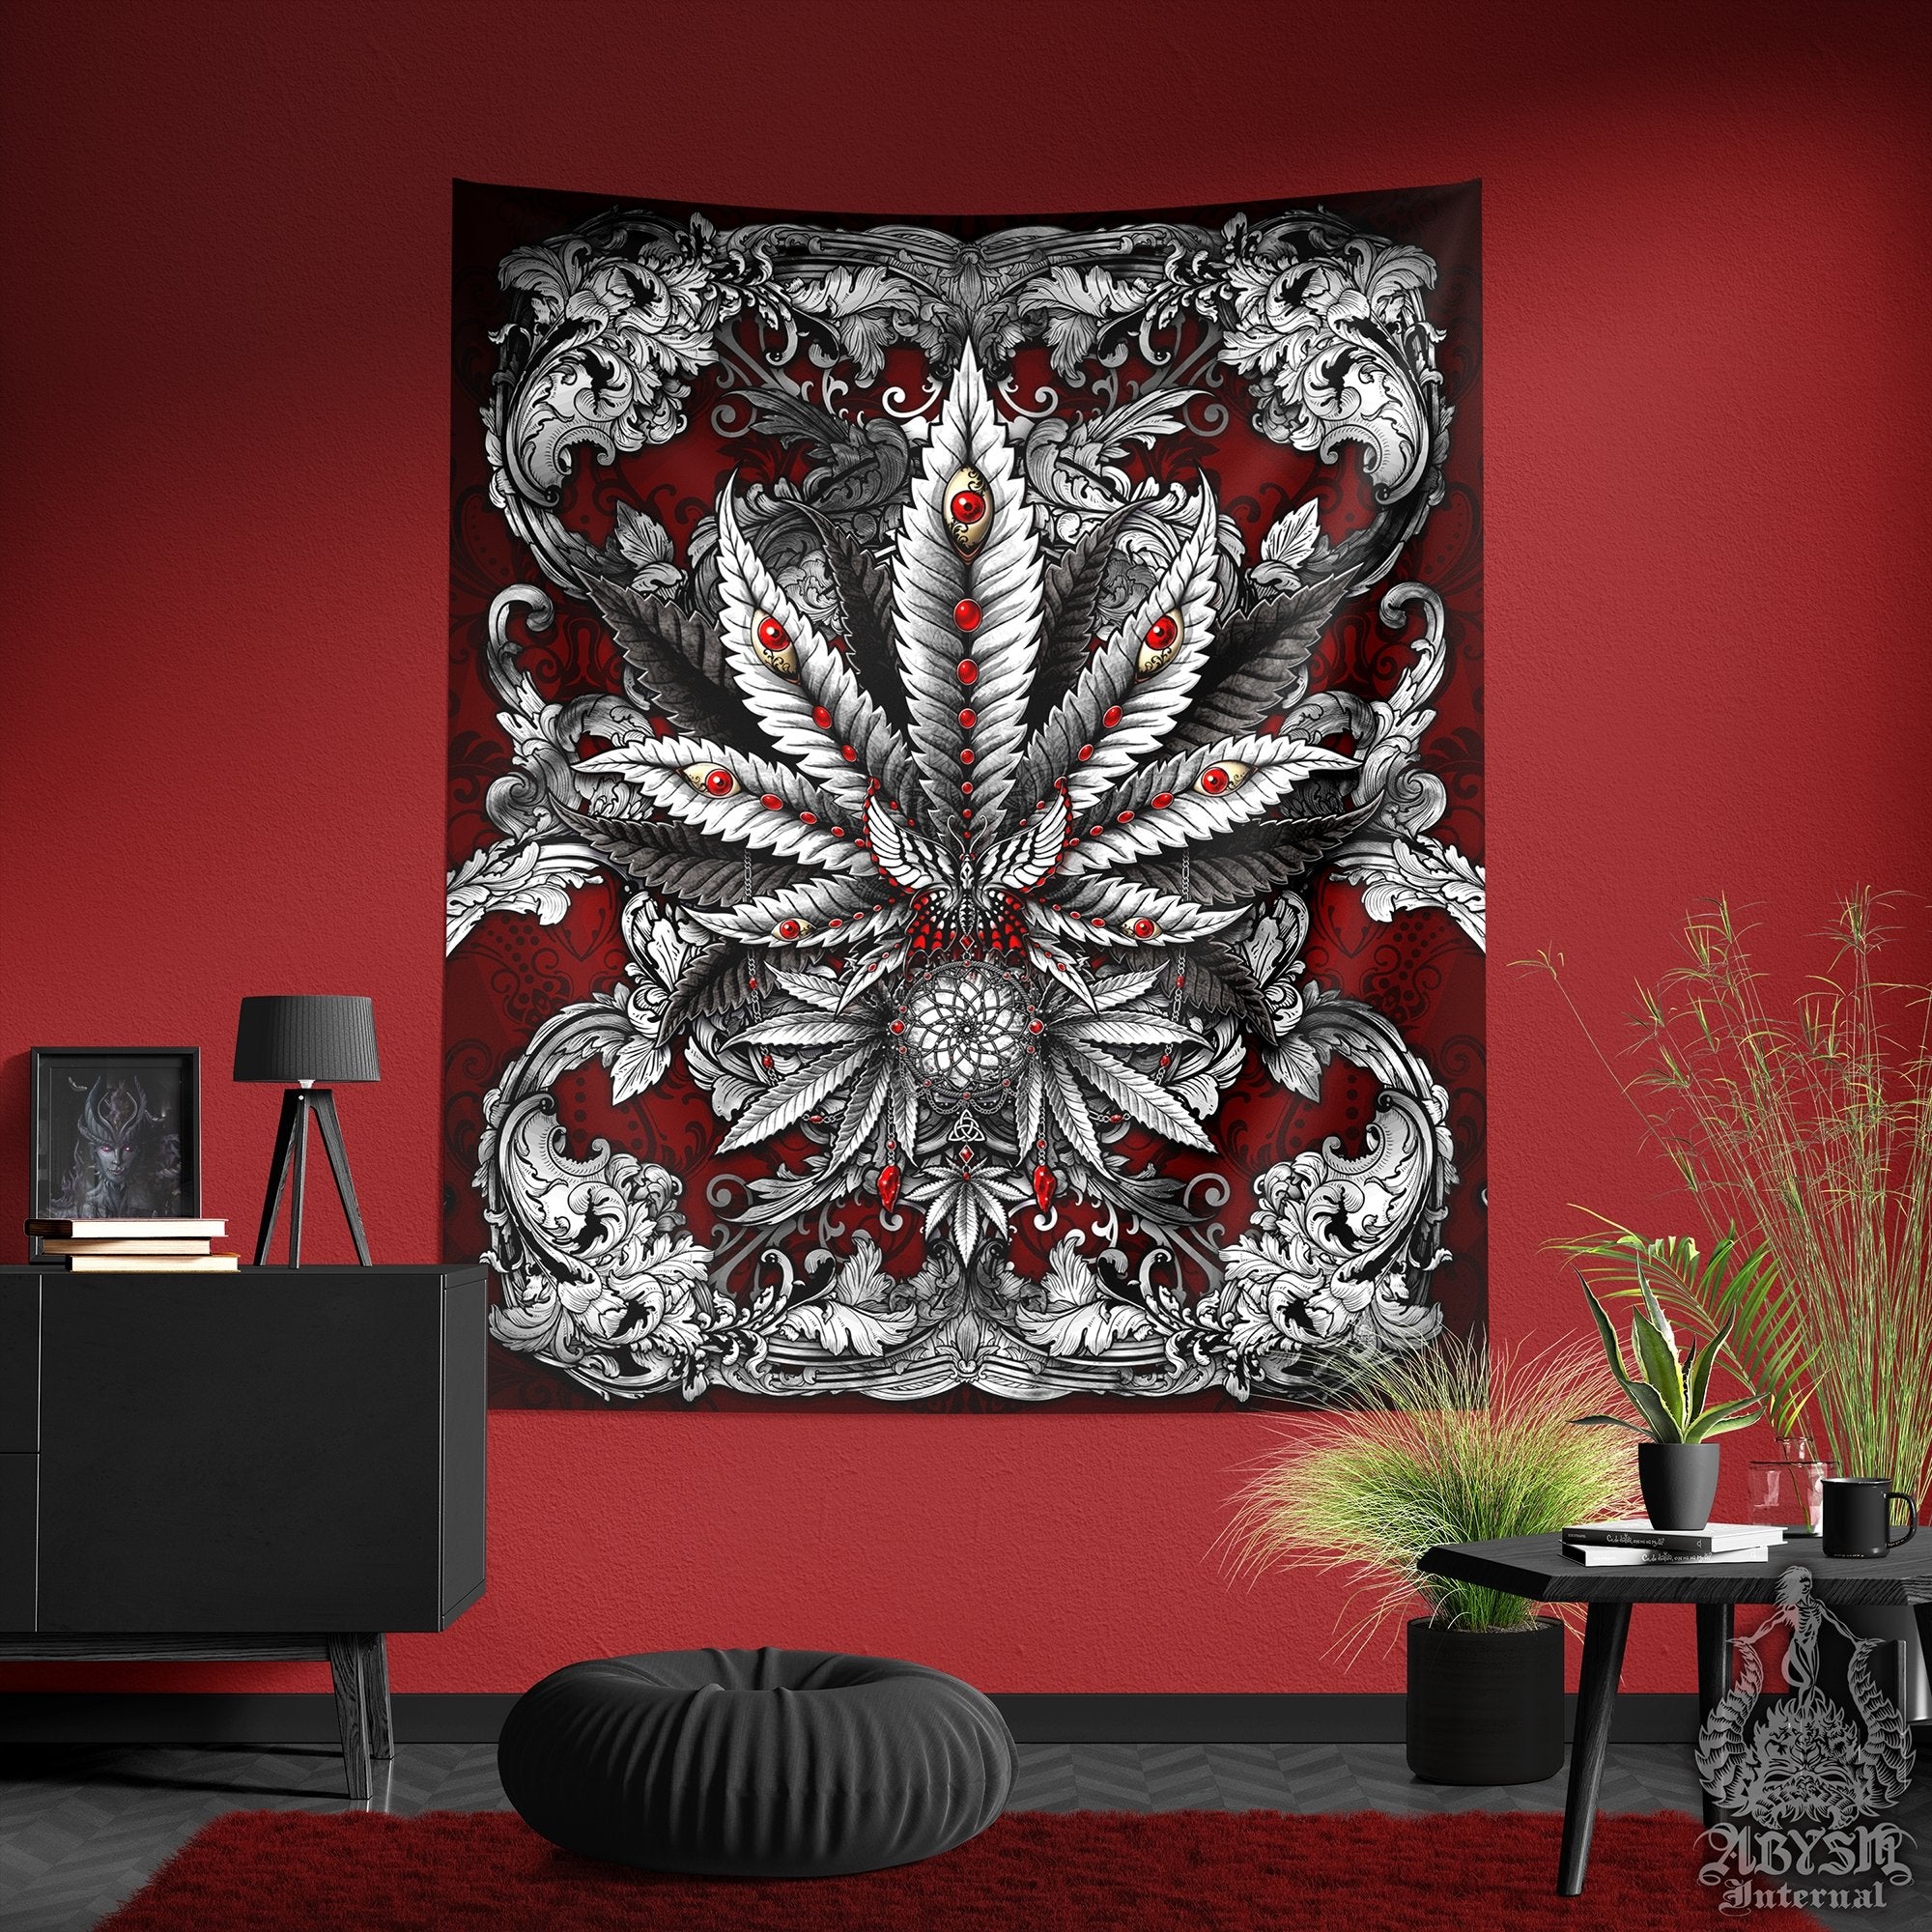 Weed Tapestry, Cannabis Shop Decor, Marijuana Wall Hanging, Indie Home Decor, Eclectic Art Print, 420 Gift - Silver - Abysm Internal